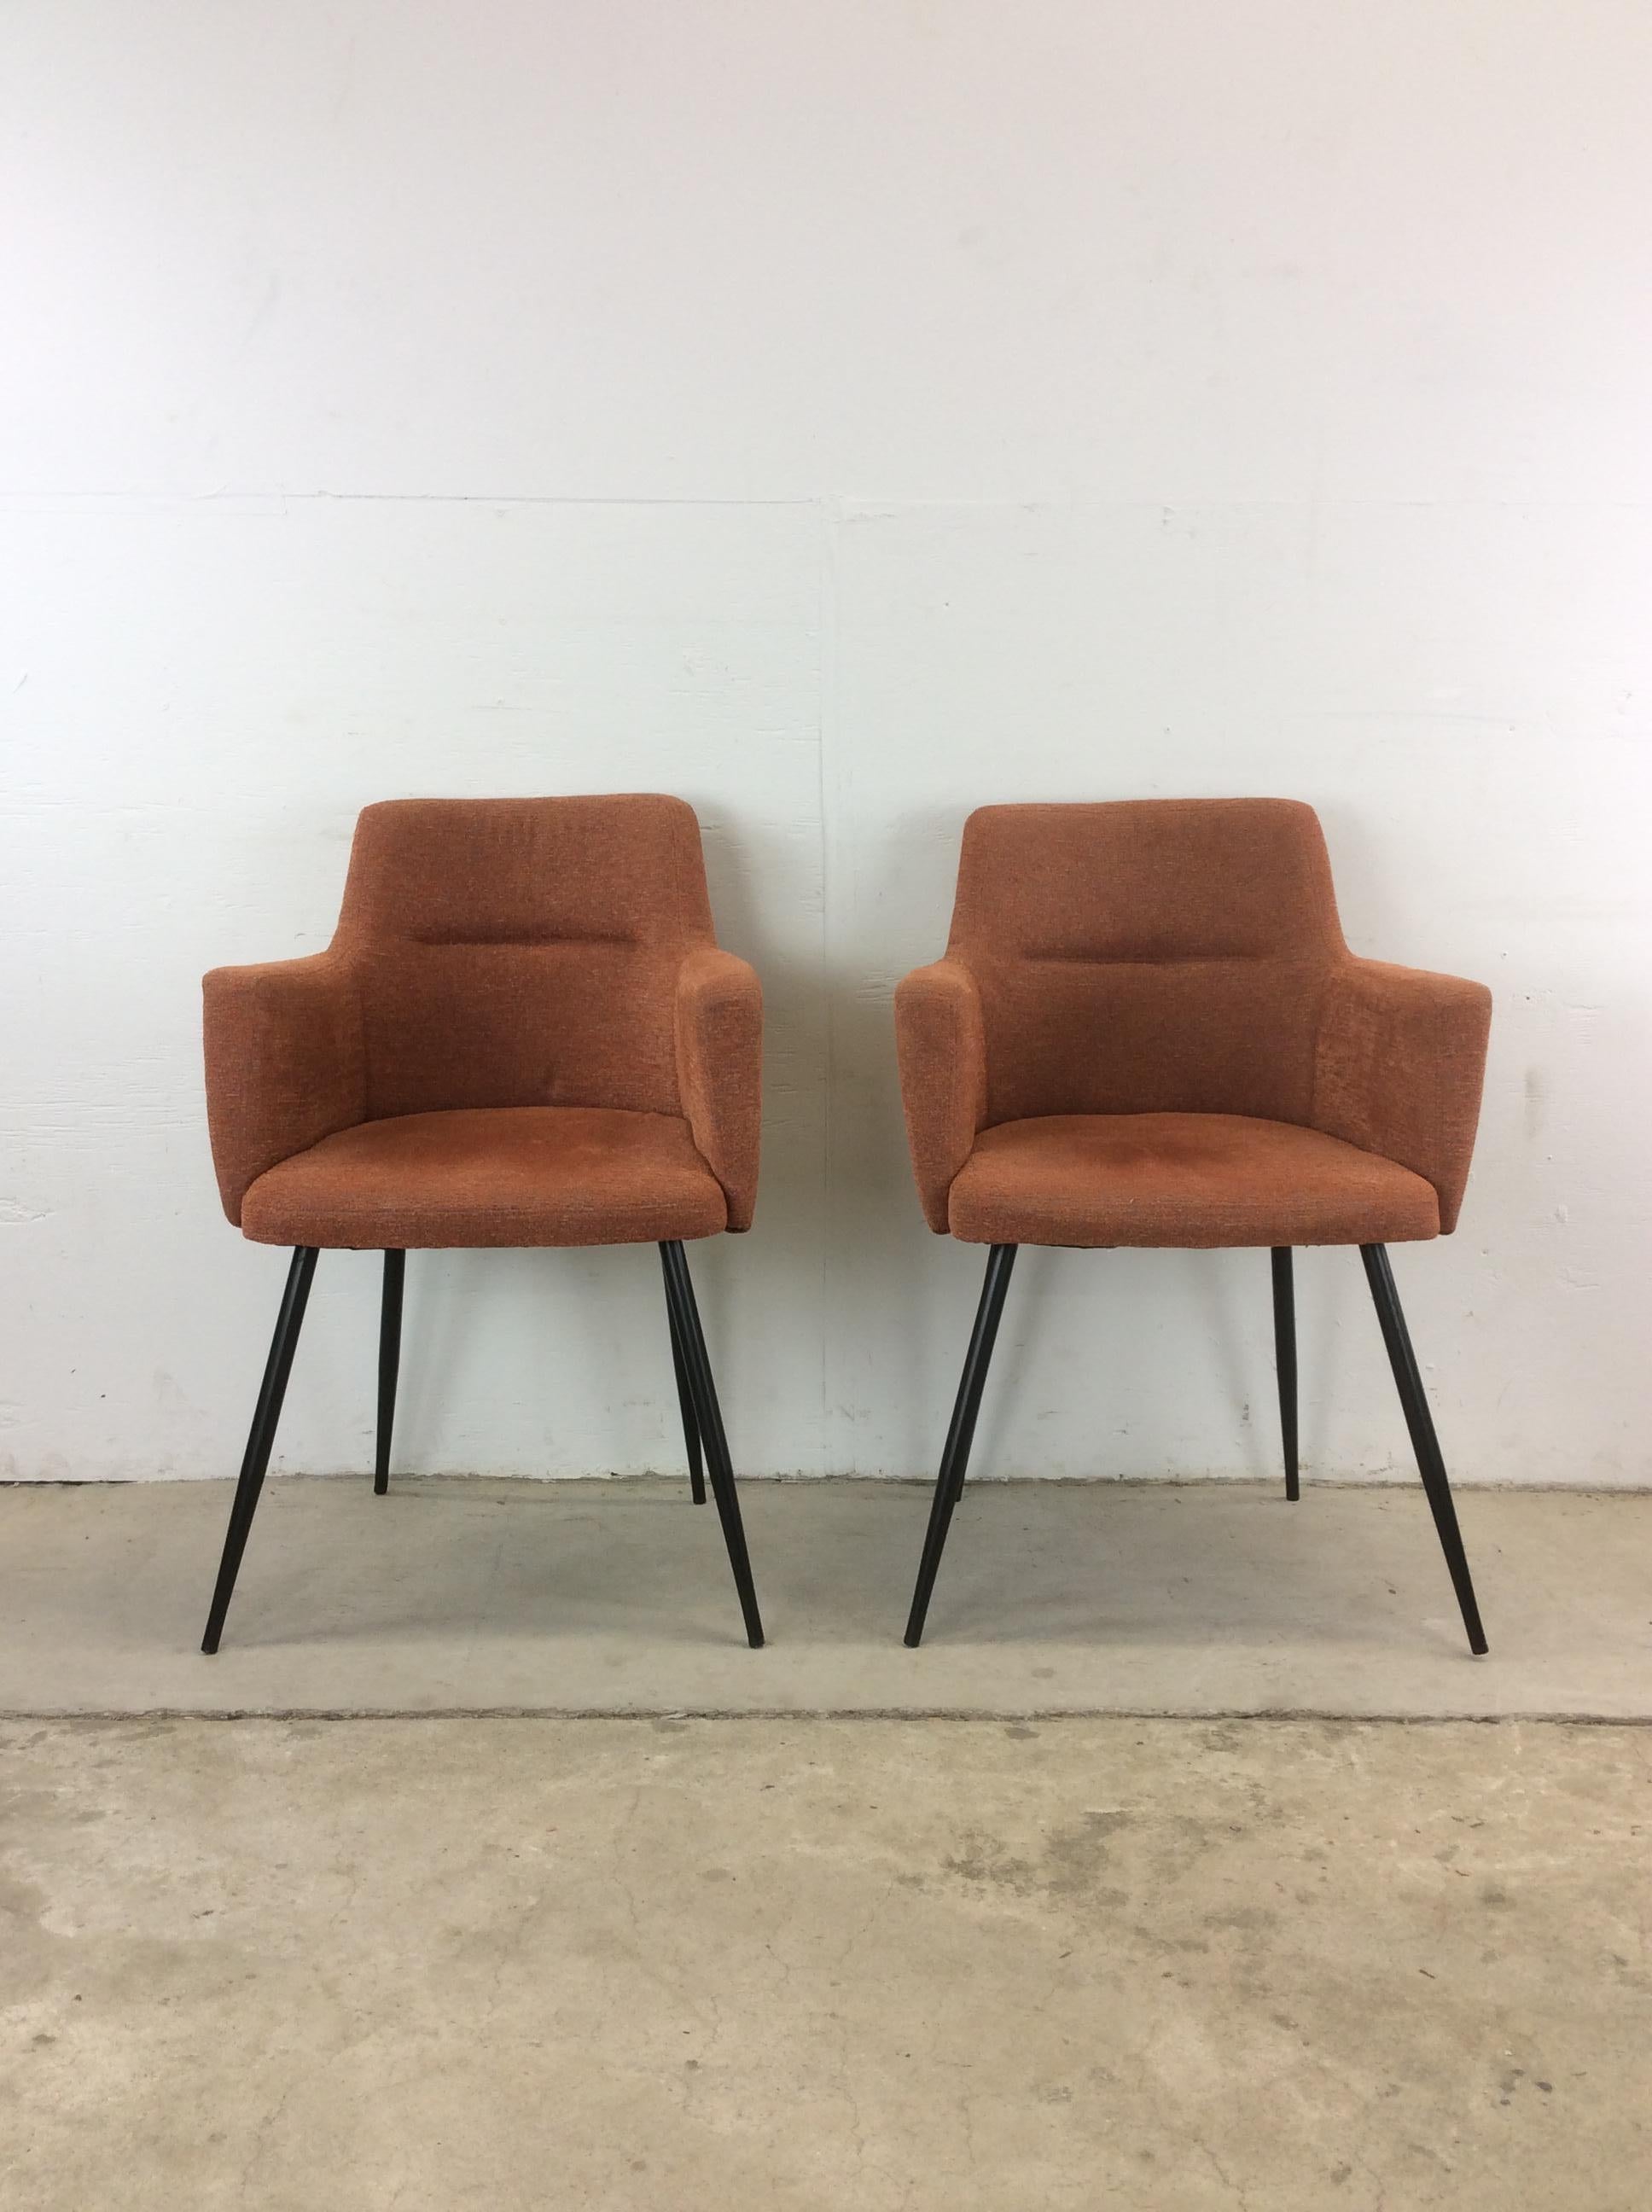 Upholstery Pair of Lumisource Andrews Chairs New Without Box For Sale